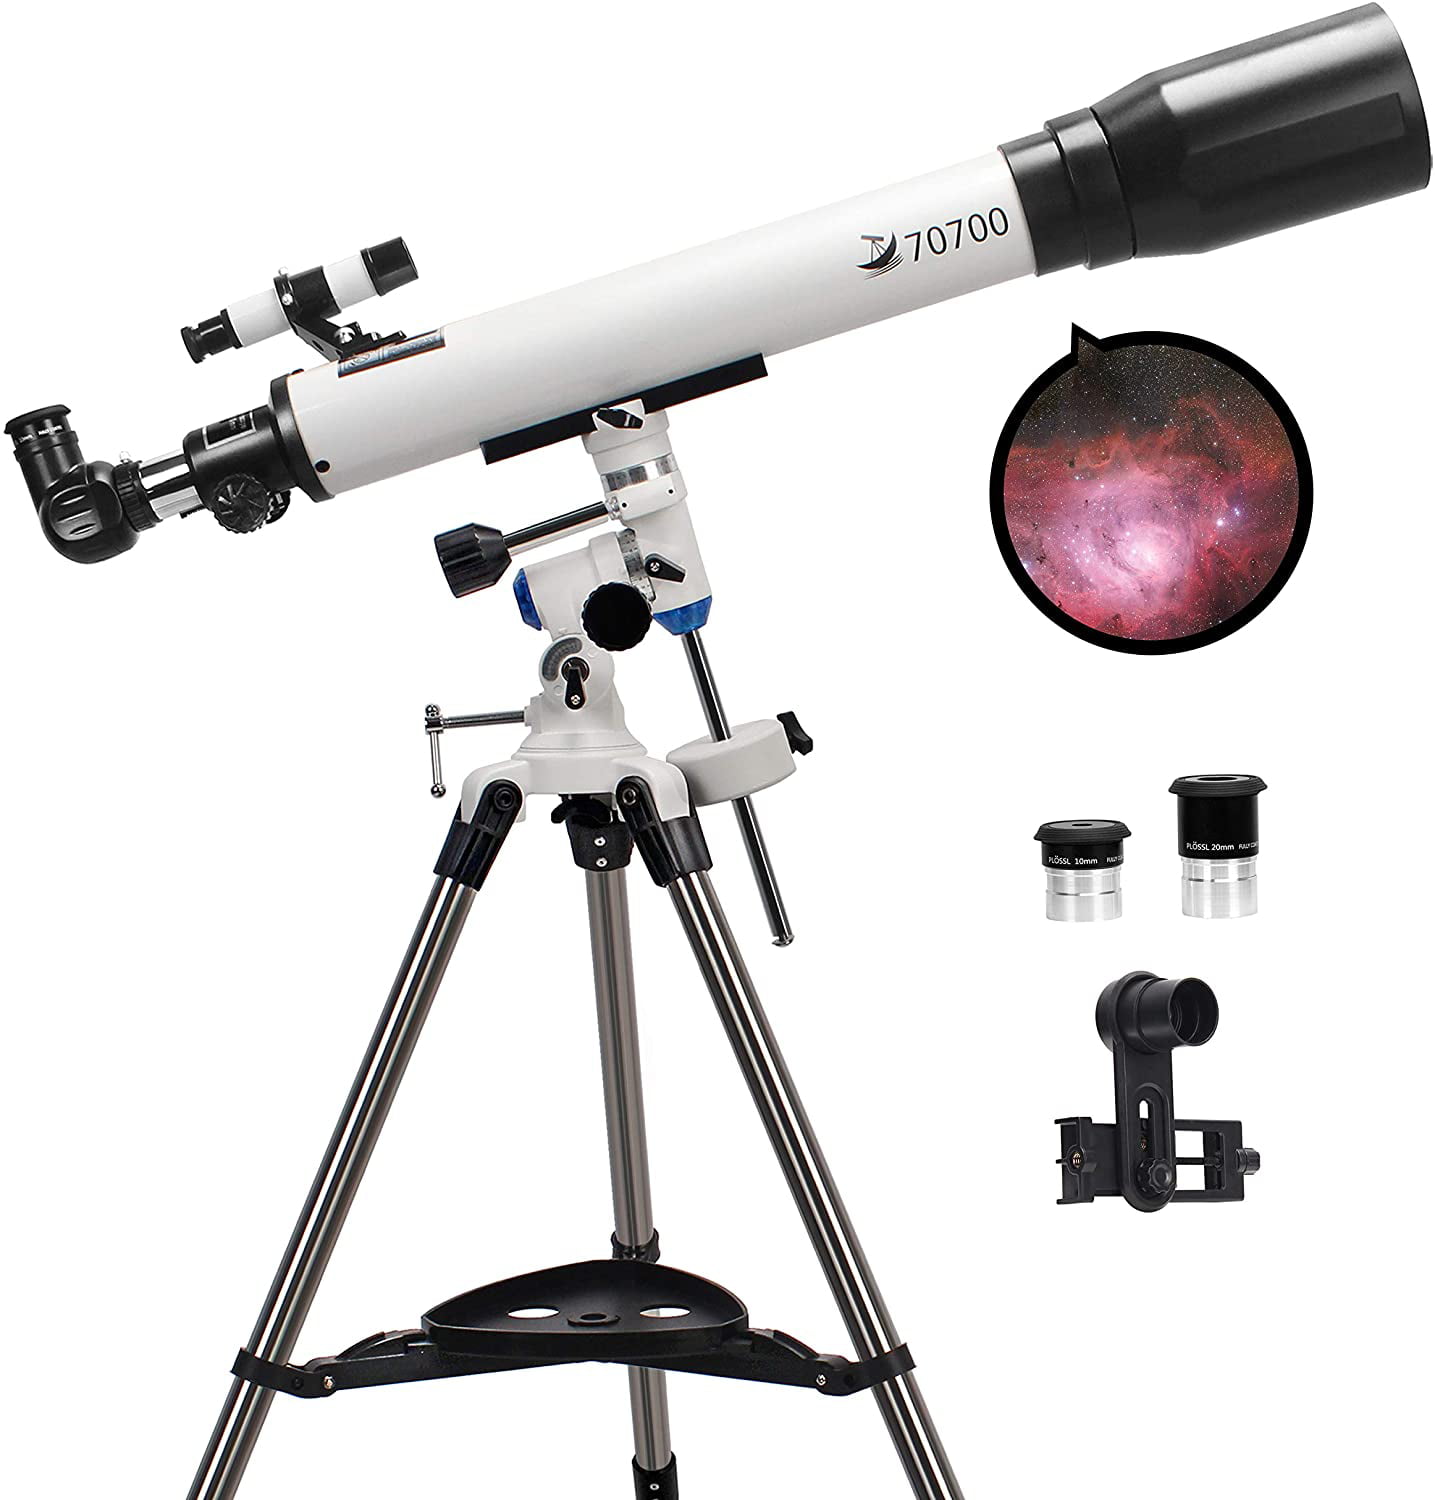 Fully-Coated Glass Optics Silver 60mm Aperture 700mm Astronomical Monocular Telescope Kids and Beginners Refractor Telescope for Adults Adjustable-Height Tripod and 3 Replaceable Eyepieces 